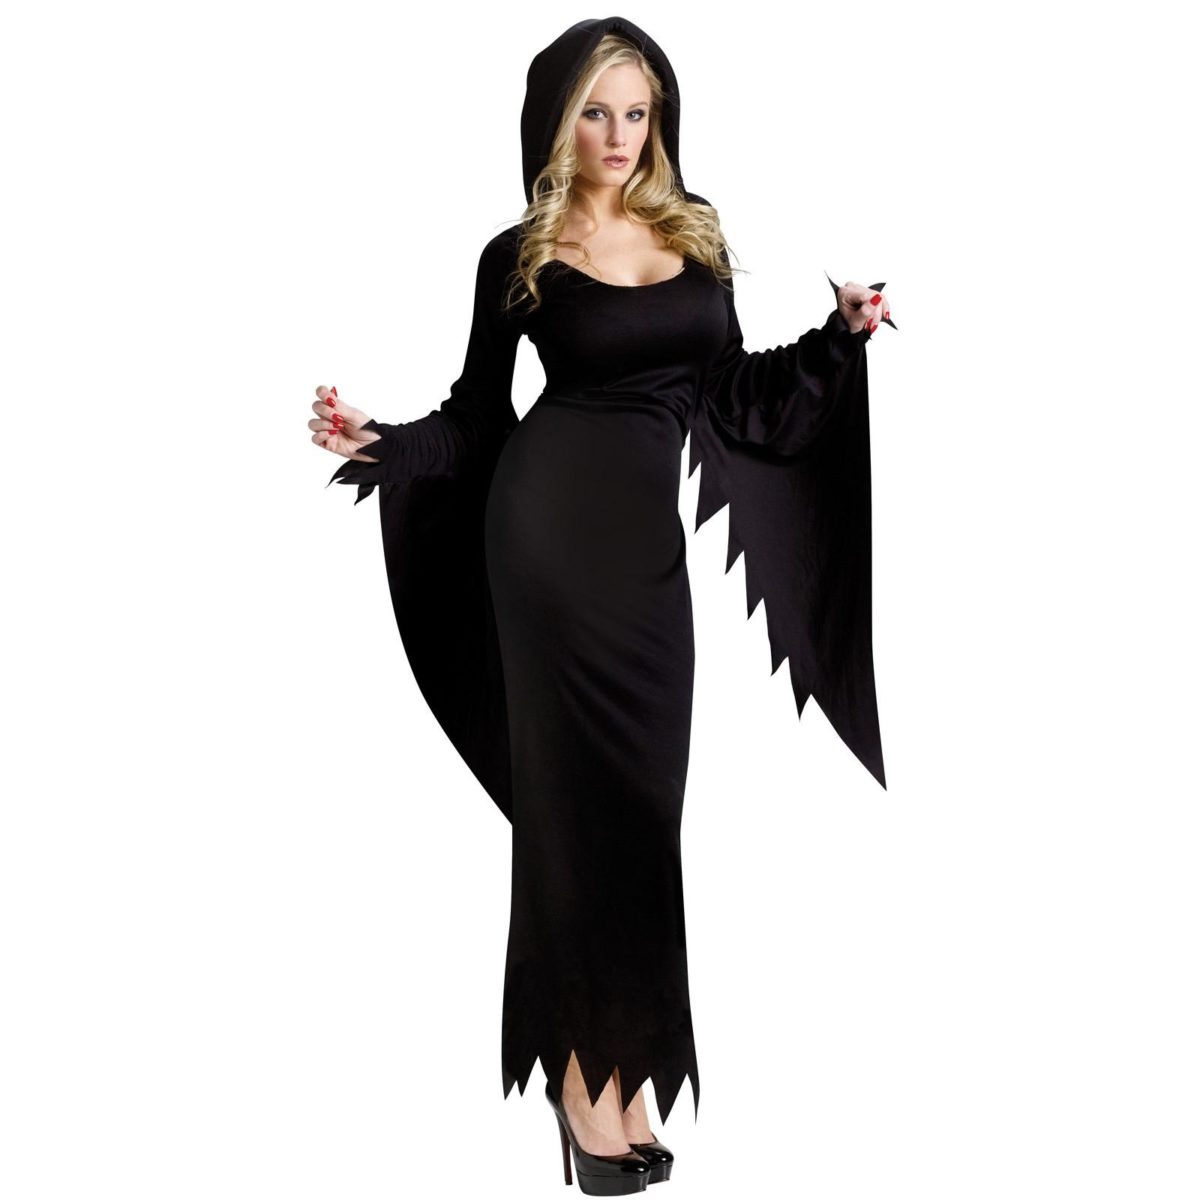 ←. hooded-gown-adult-costume-cx-803945. 